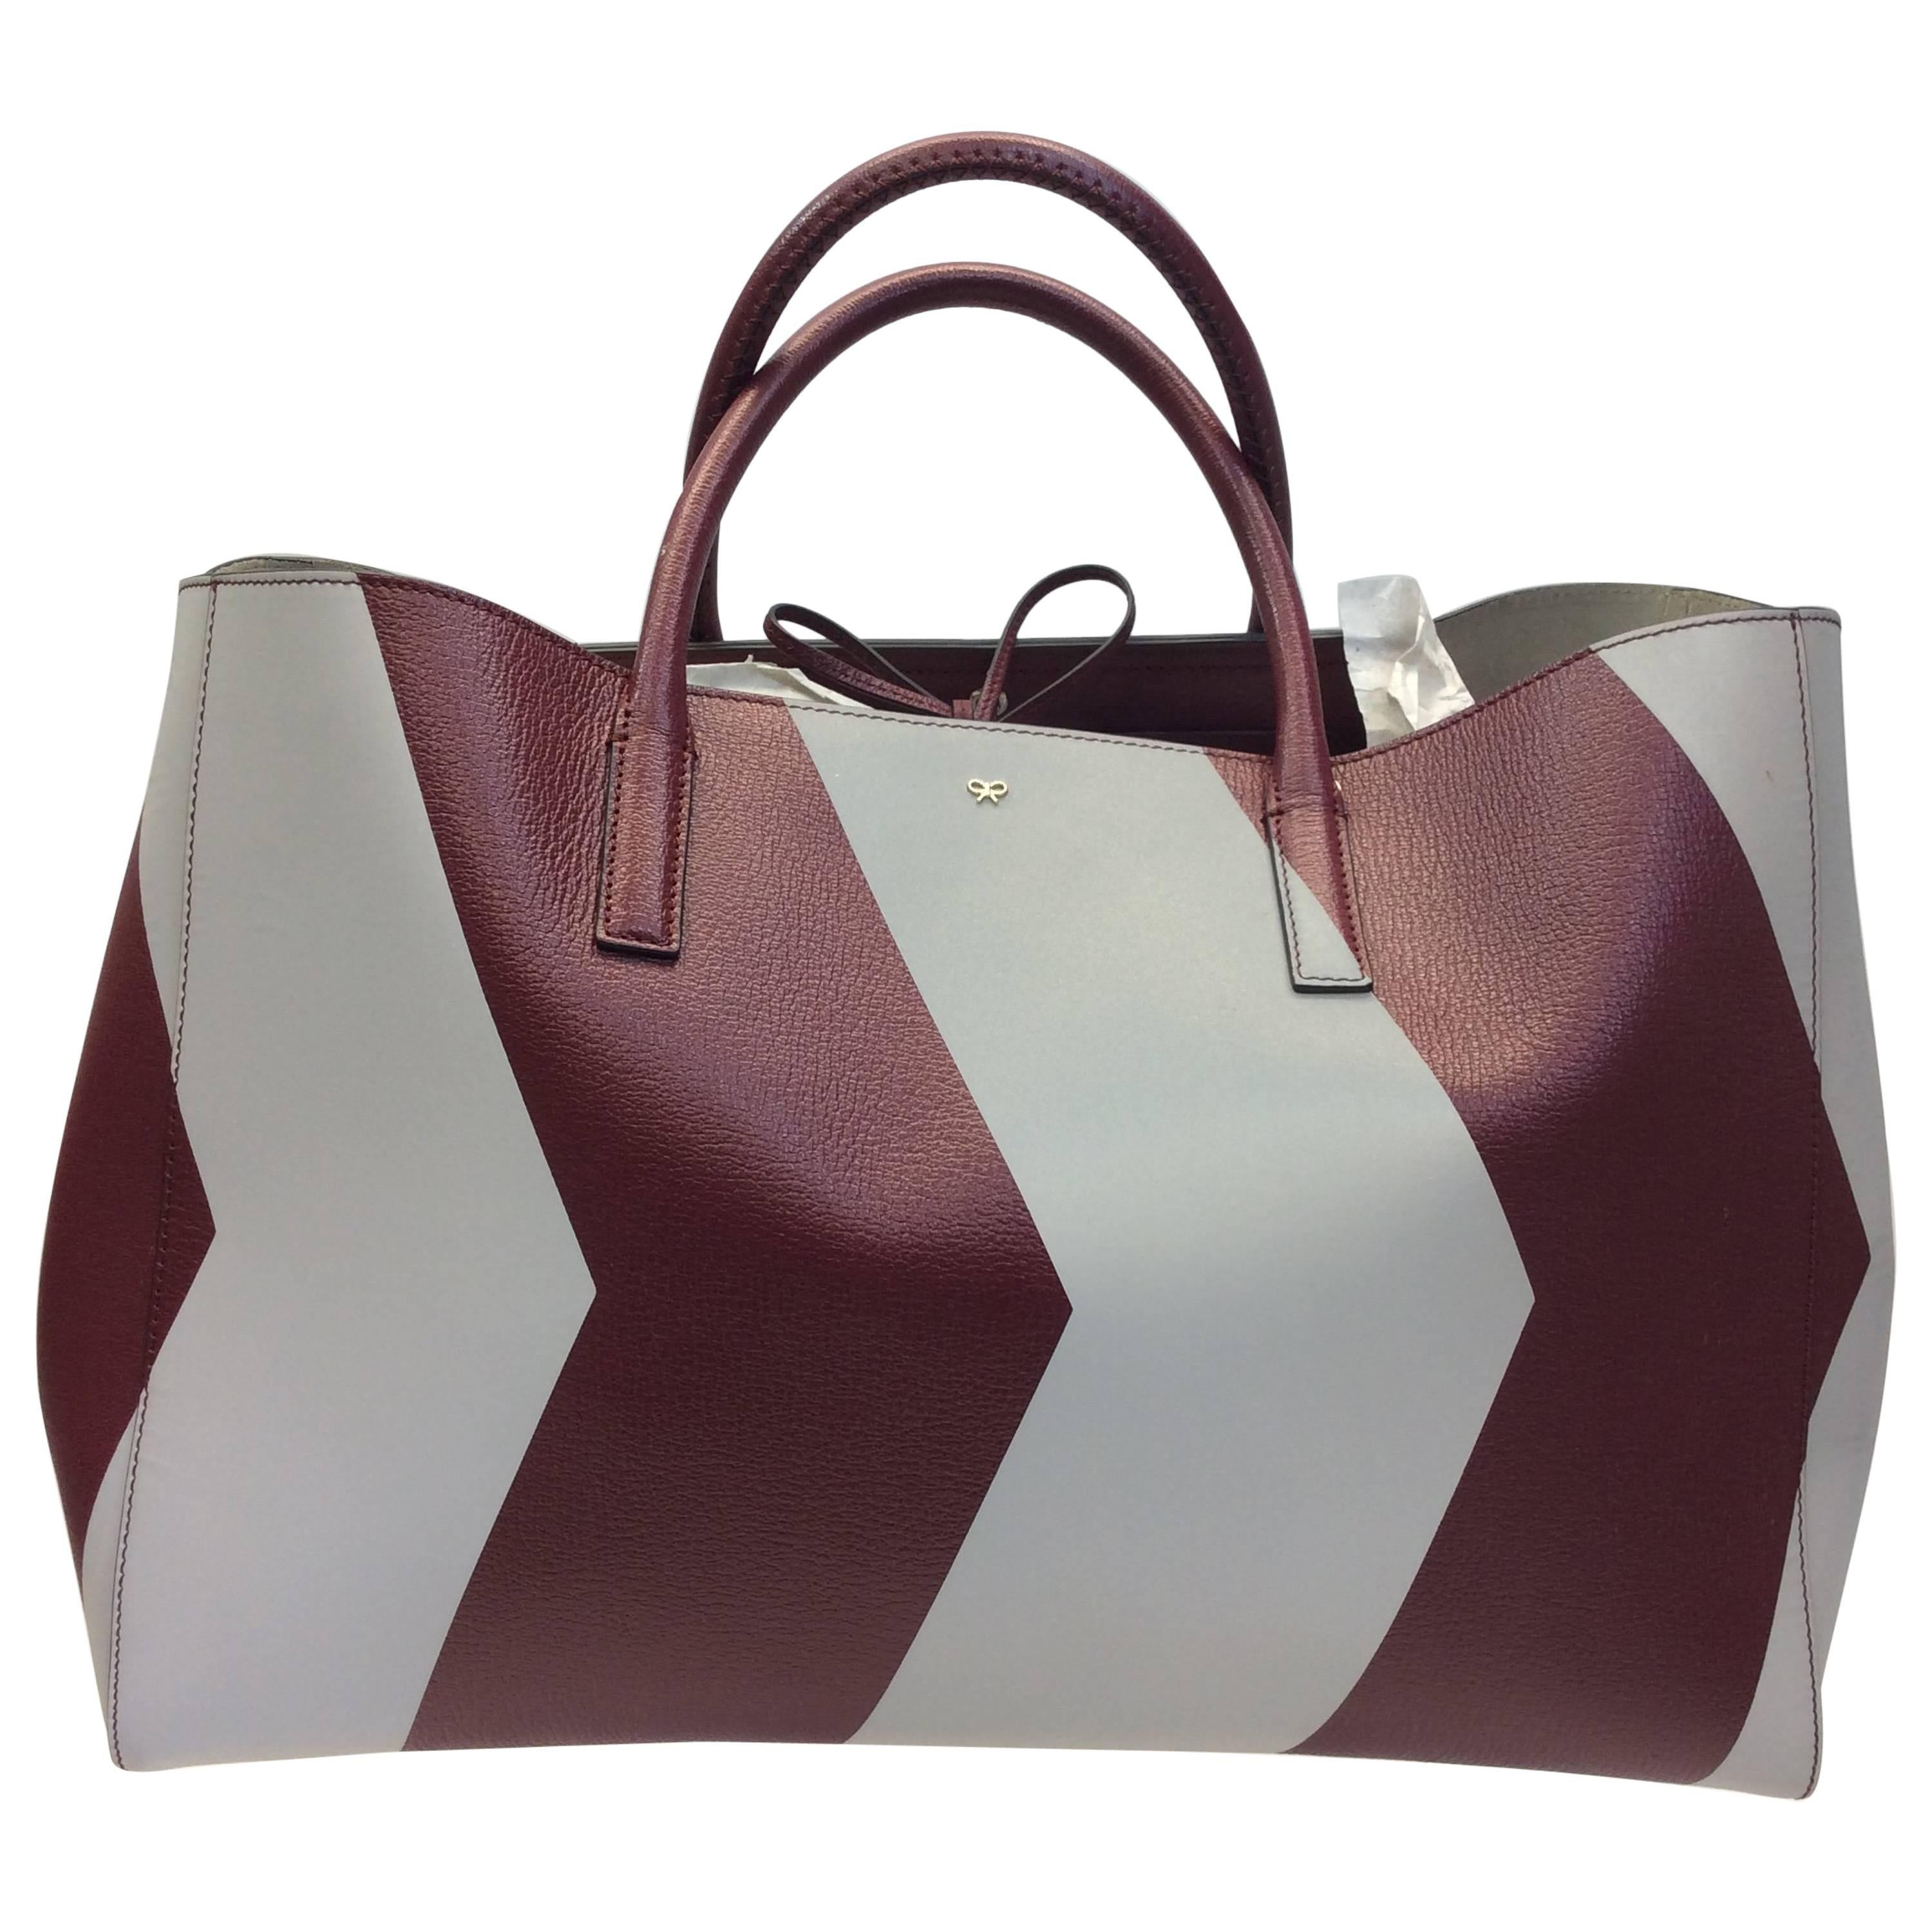 Anya Hindmarch Burgandy and Grey Tote For Sale